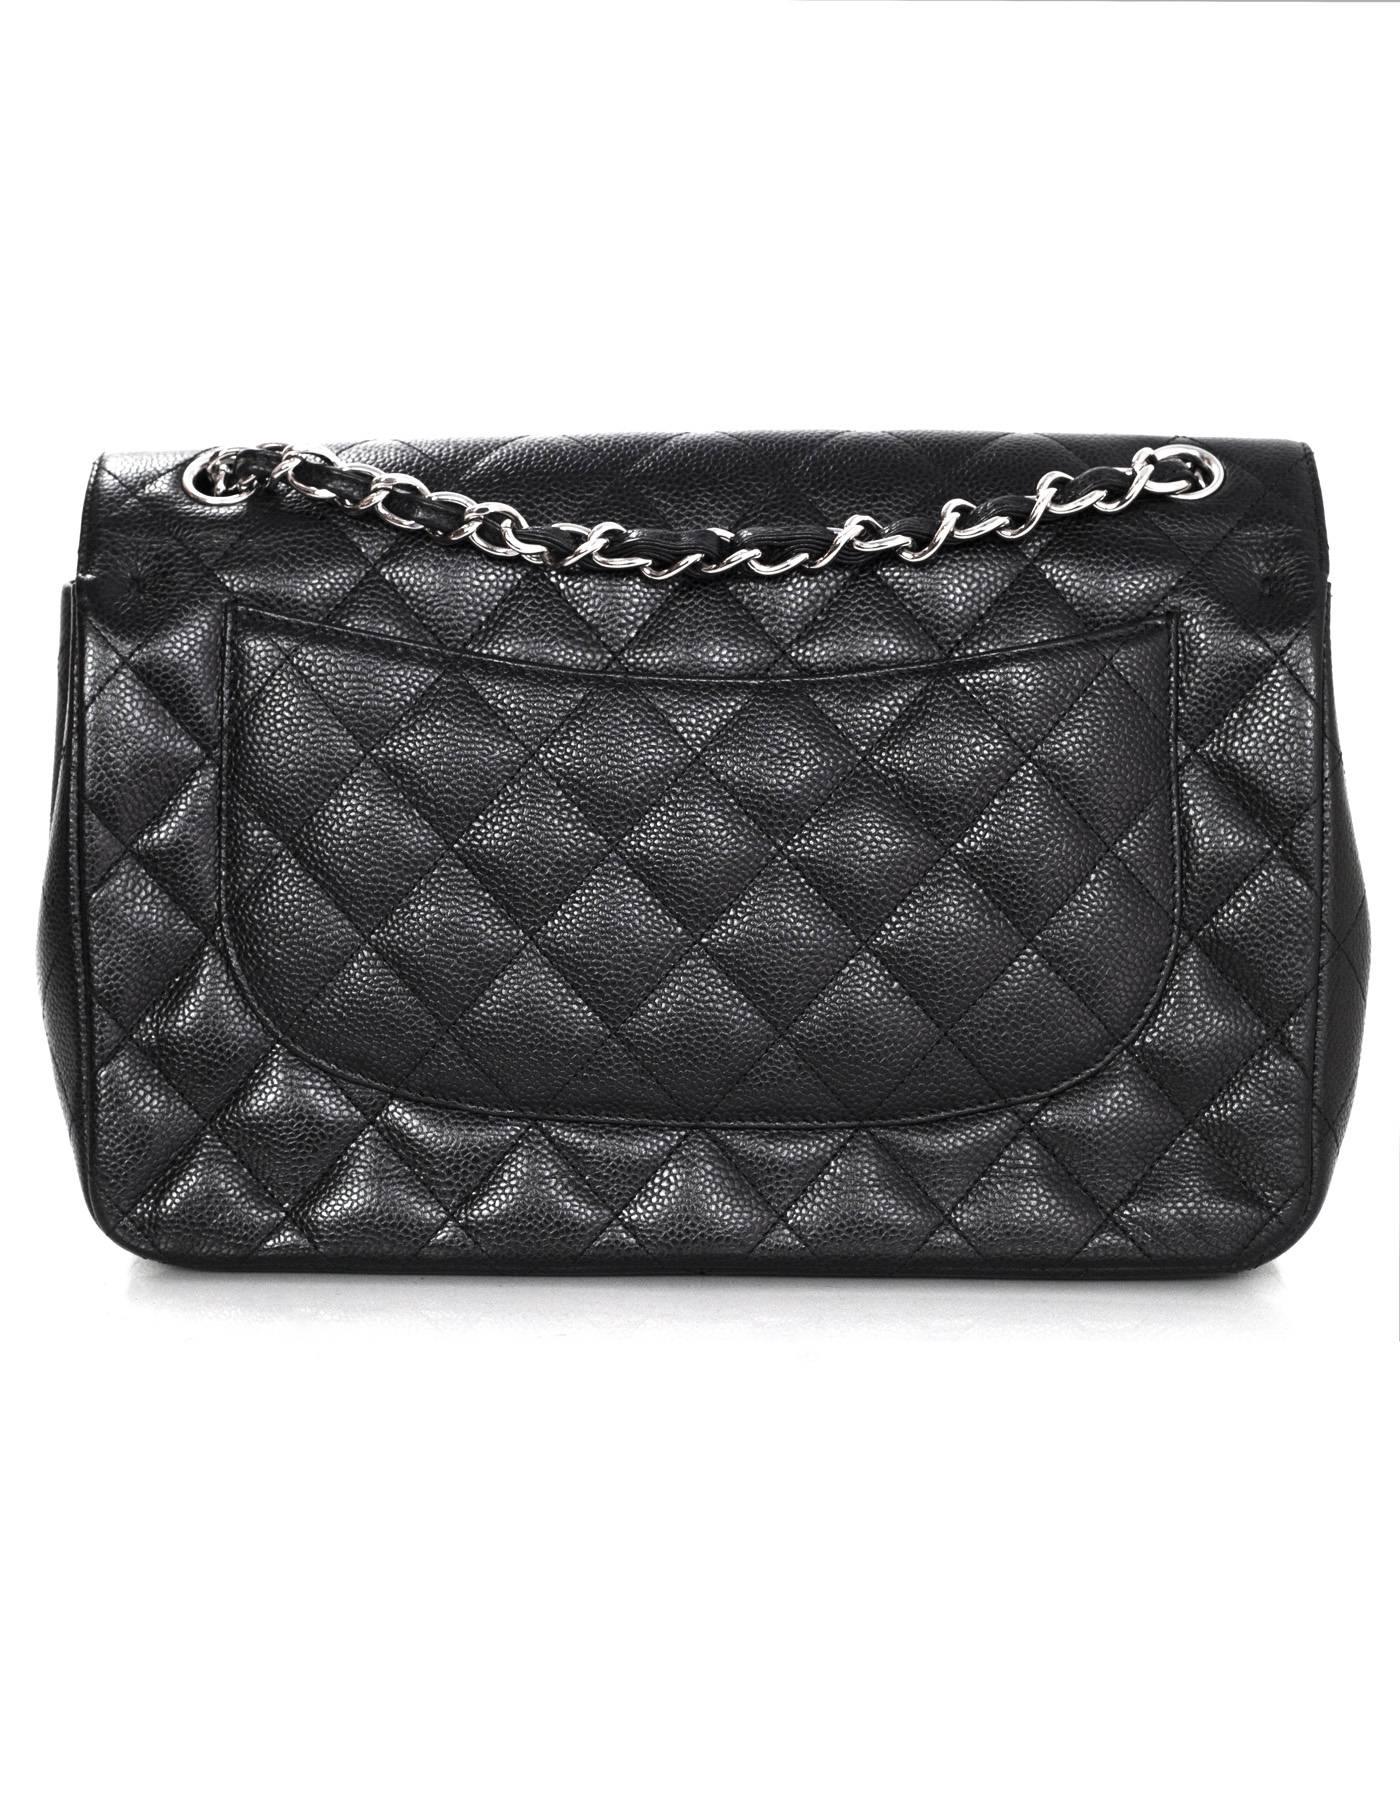 Chanel Black Caviar Leather Quilted Double Flap Jumbo Bag with SHW rt. $5, 900 In Excellent Condition In New York, NY